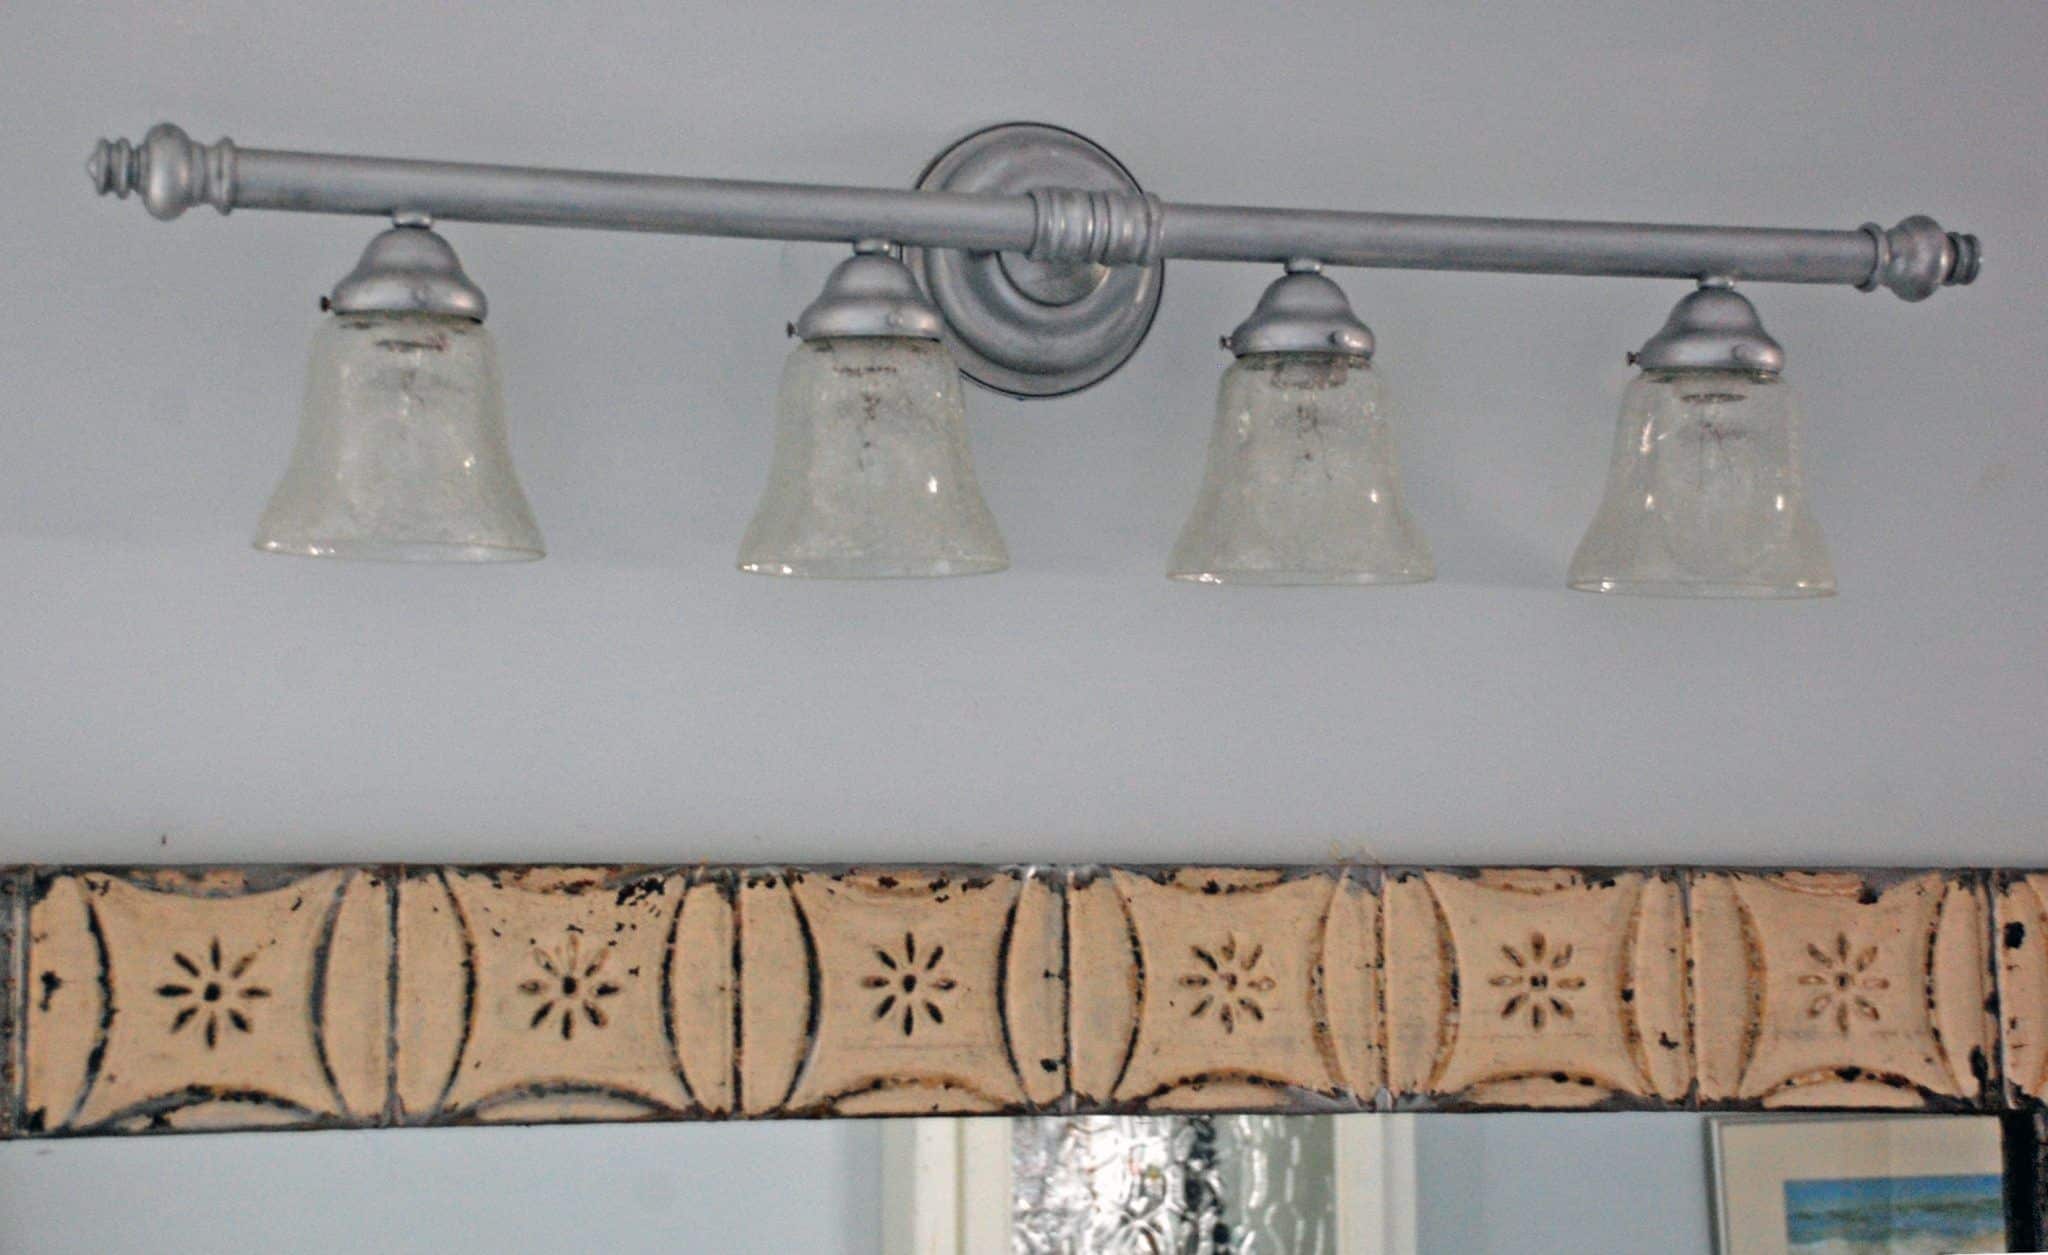 Using Rub'n Buff to update a light fixture · Nourish and Nestle